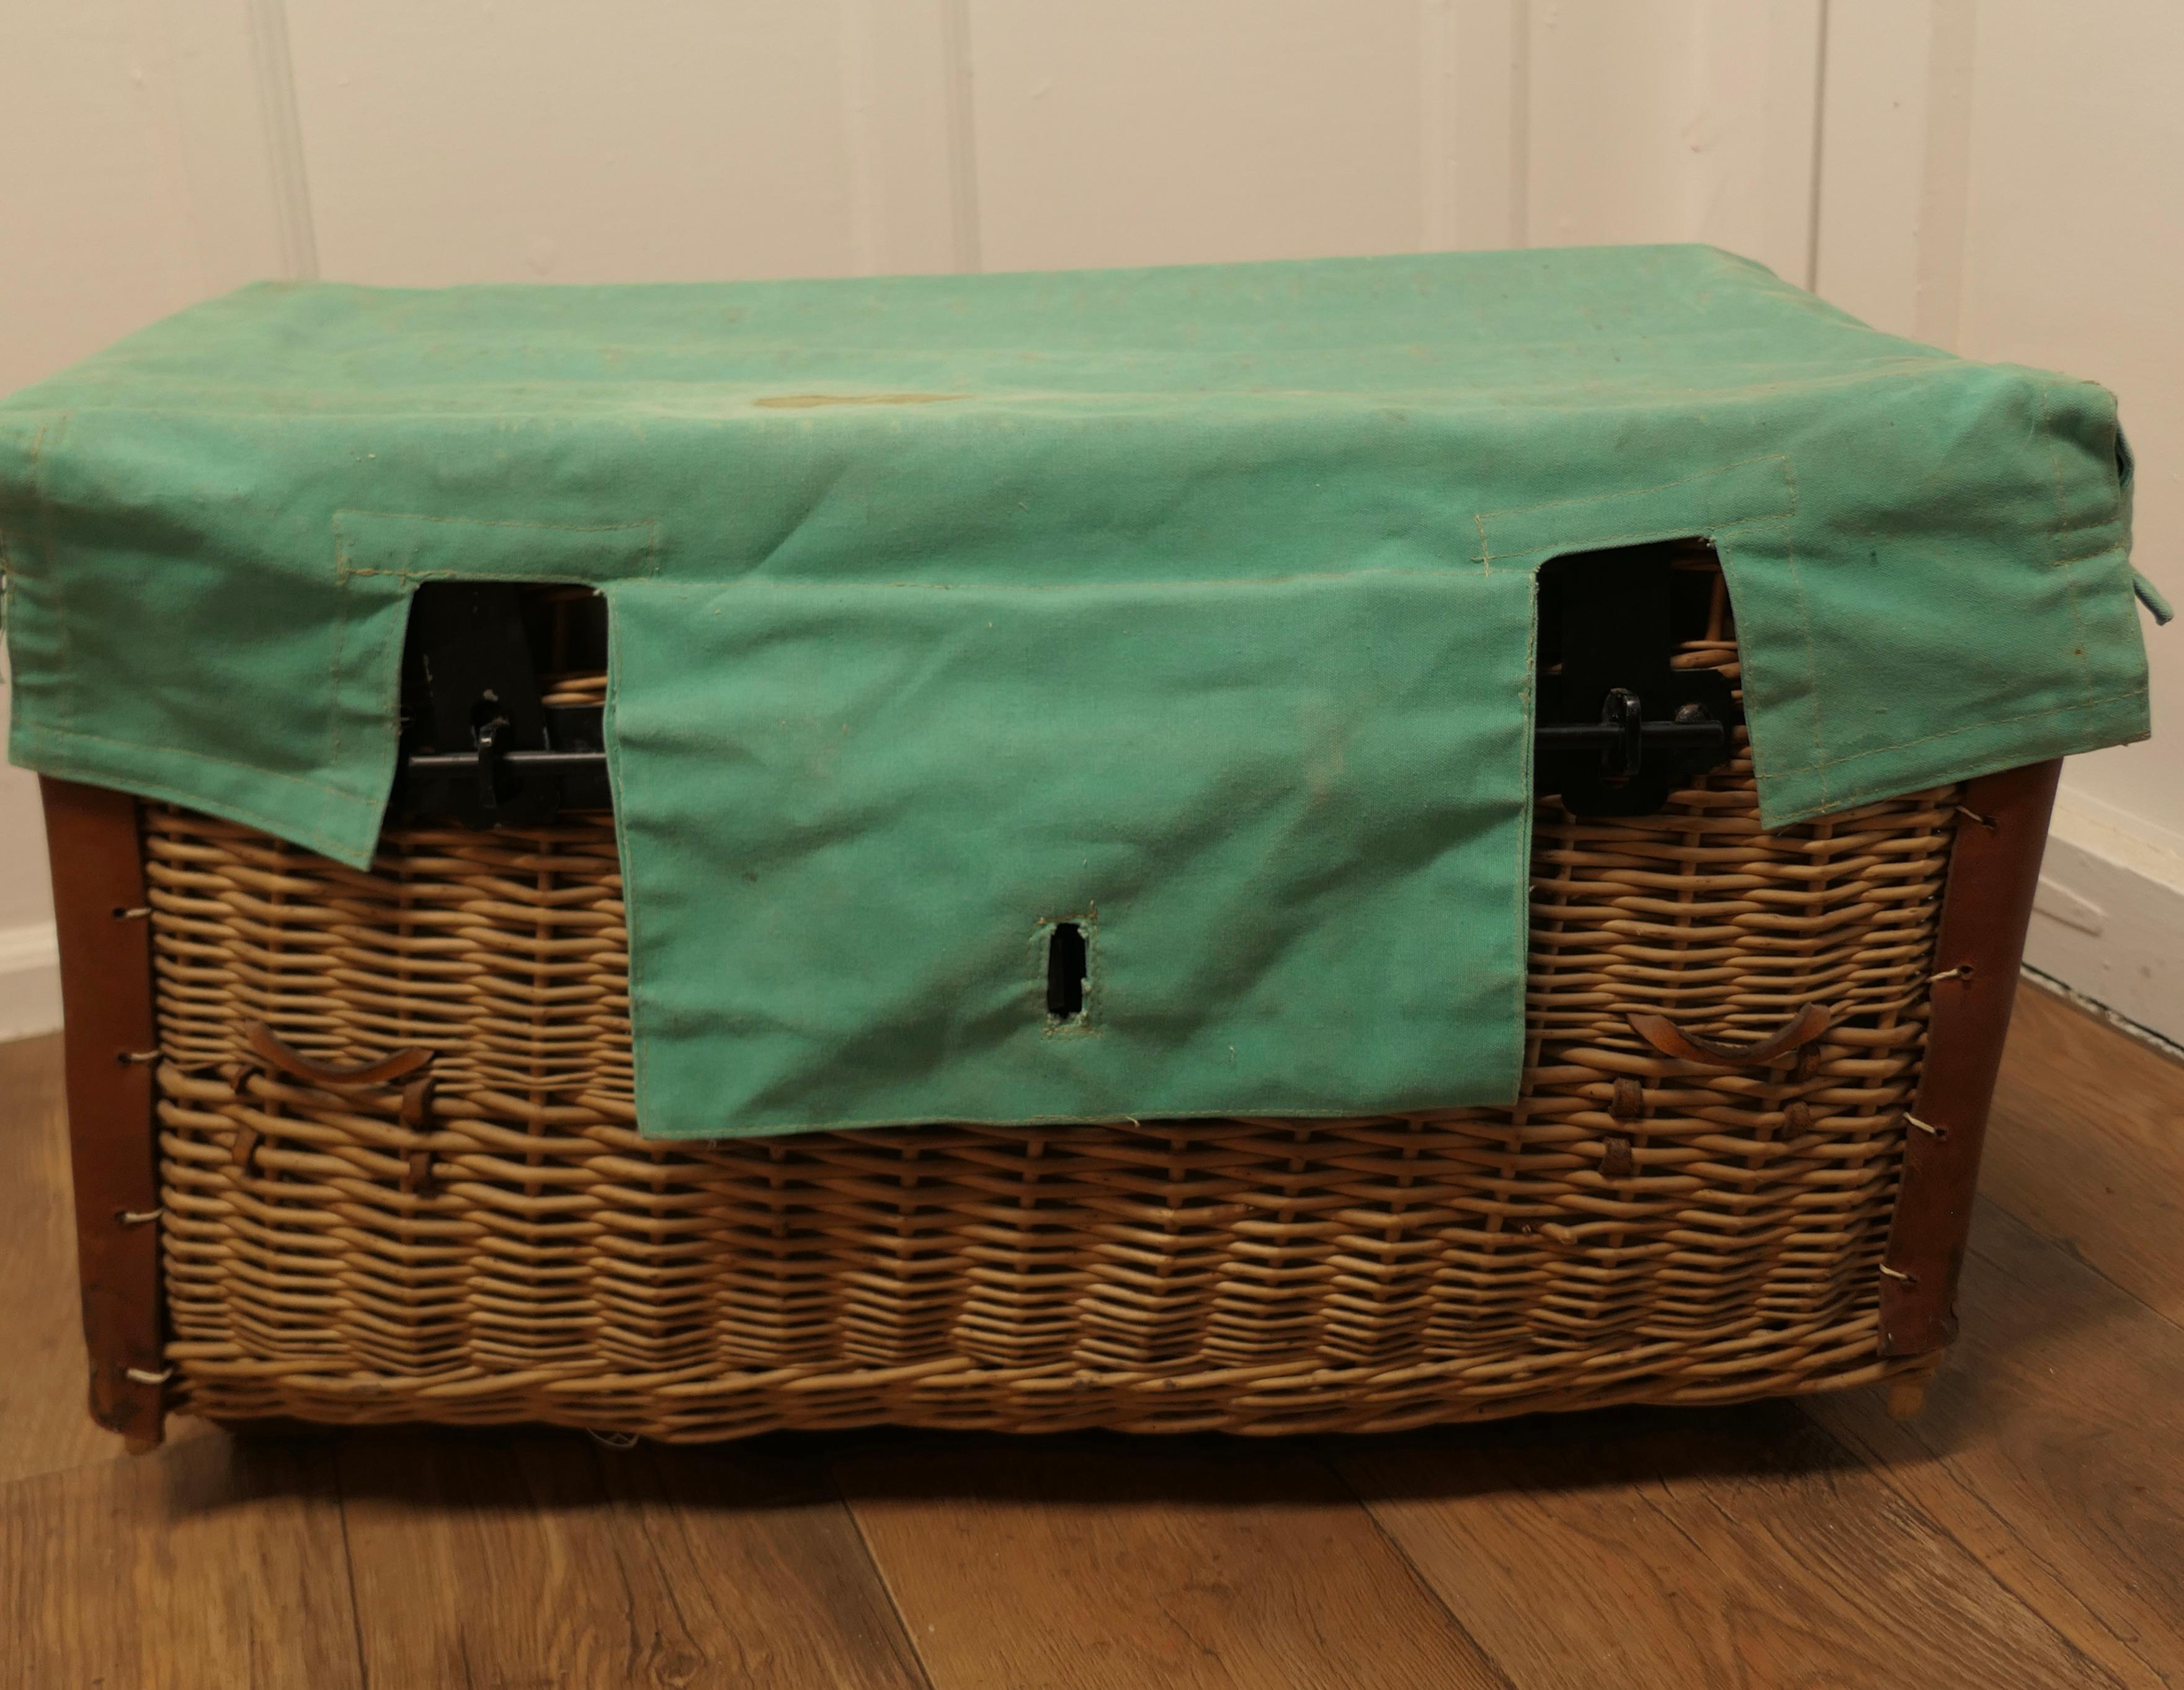 Antique Wicker Laundry Basket or Linen Hamper

This is an excellent example and in remarkably good condition for its age, the basket originates from a military source, it has a canvas lining, and a green canvas cover which is attached along the back